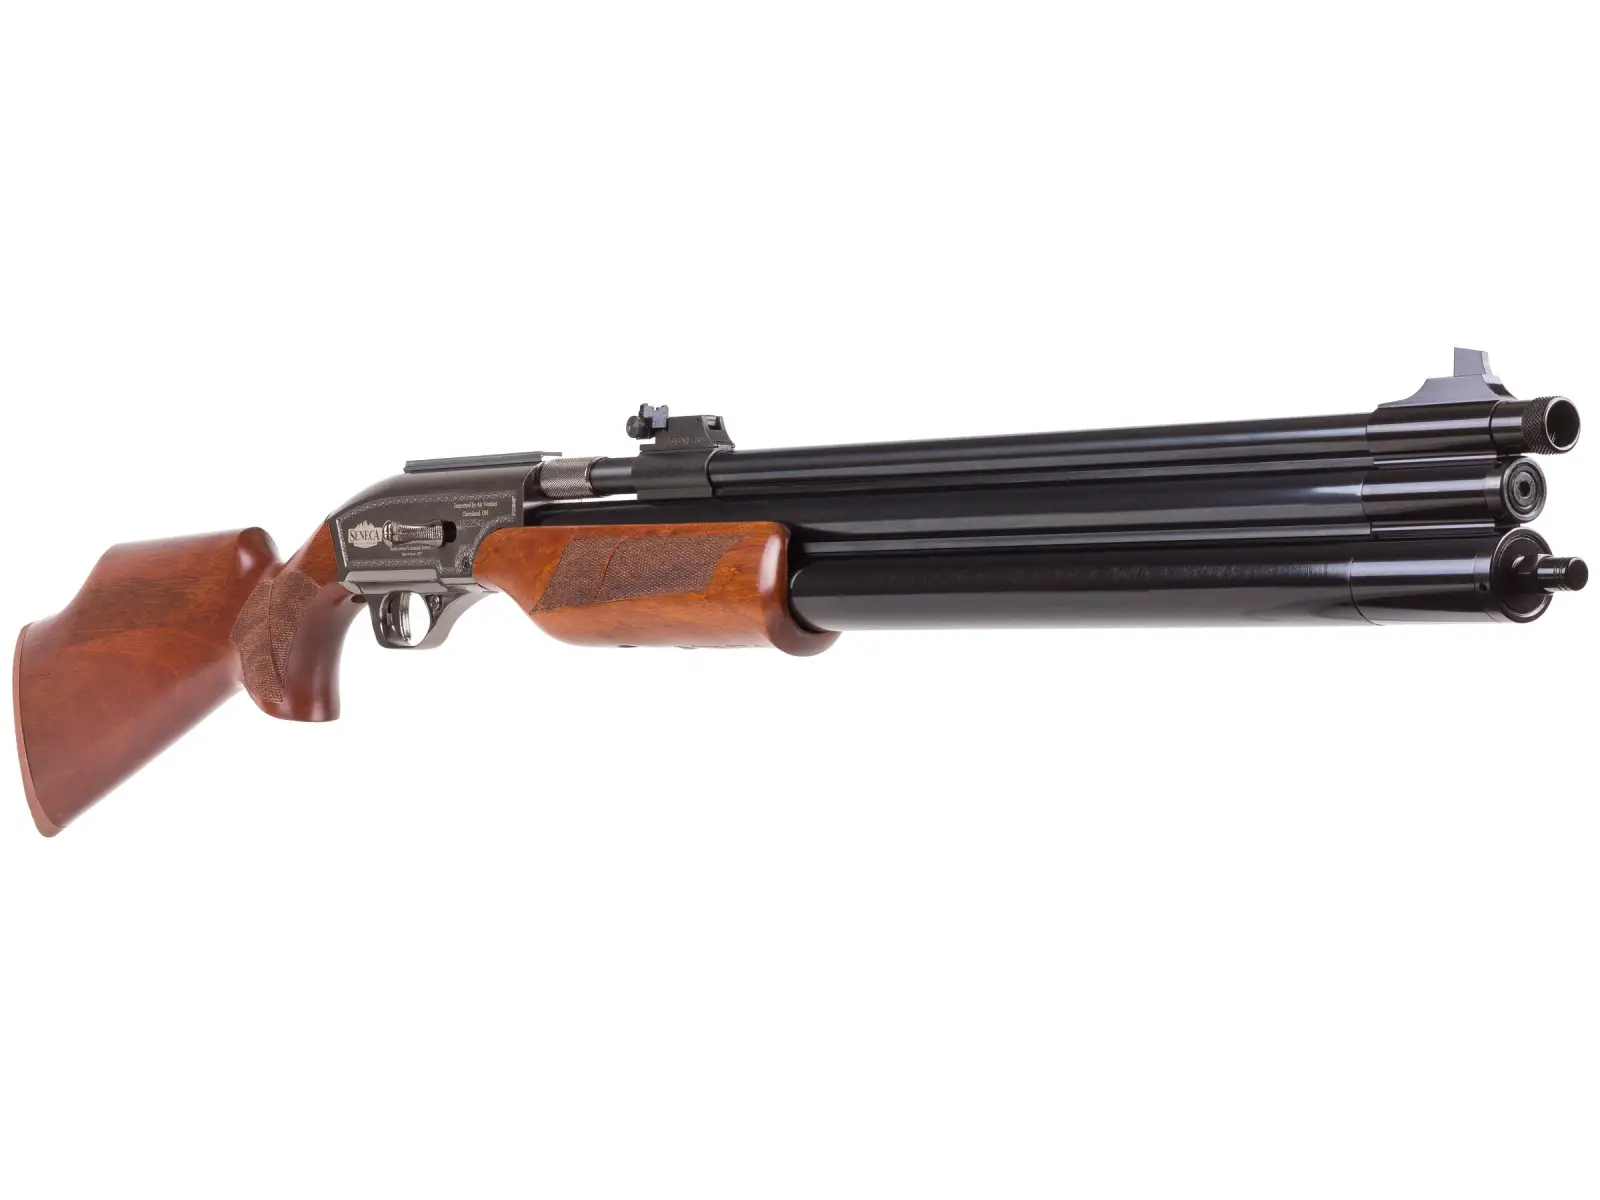 s111 Best .50 Caliber Air Rifles - Top 5 Hard-hitting Pellet Guns for Big Games (Reviews and Buying Guide 2023)